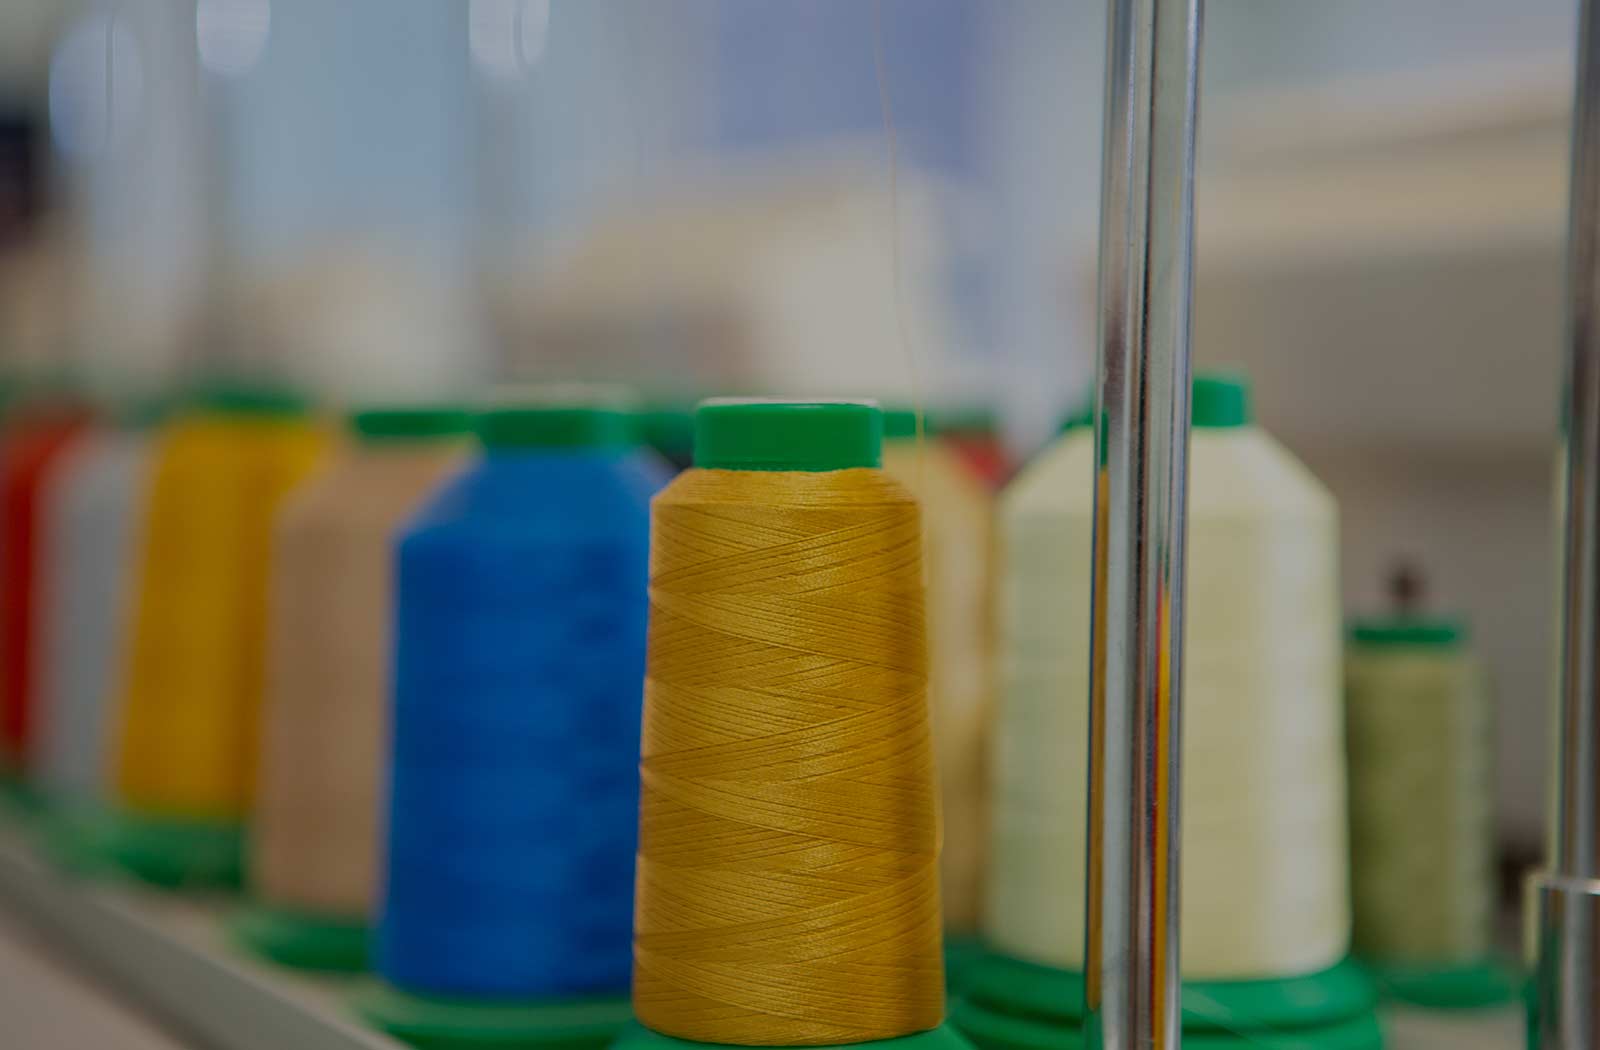 bobbins of thread colored white, yellow, blue